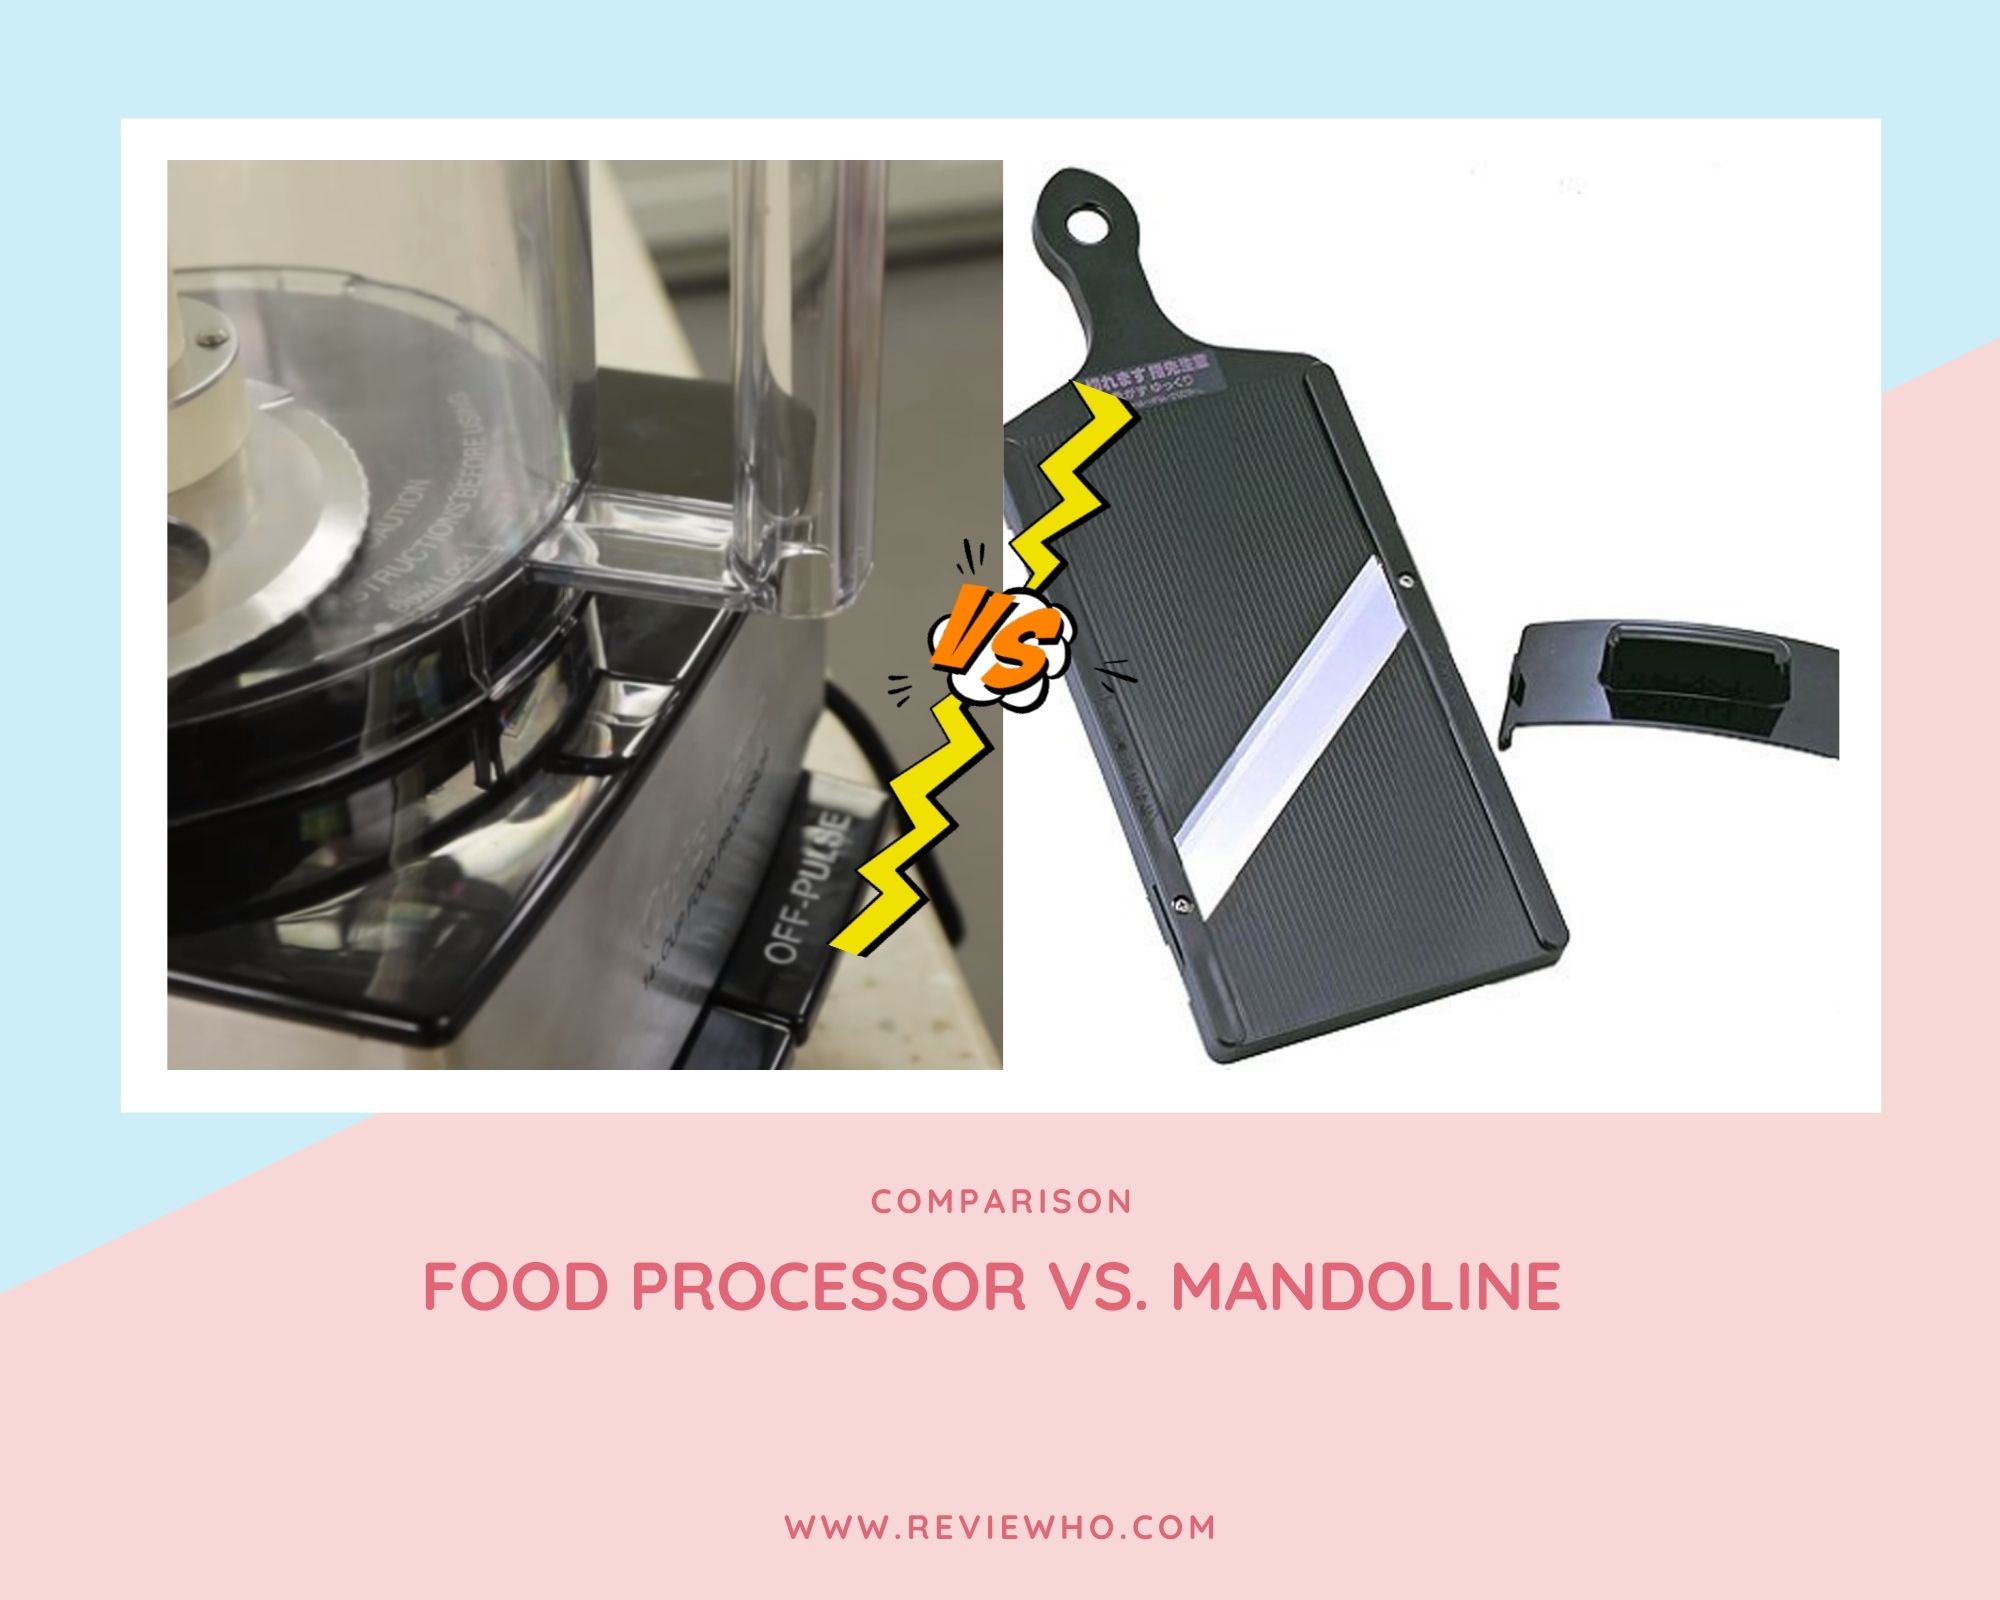 What is the best mandoline or food processor